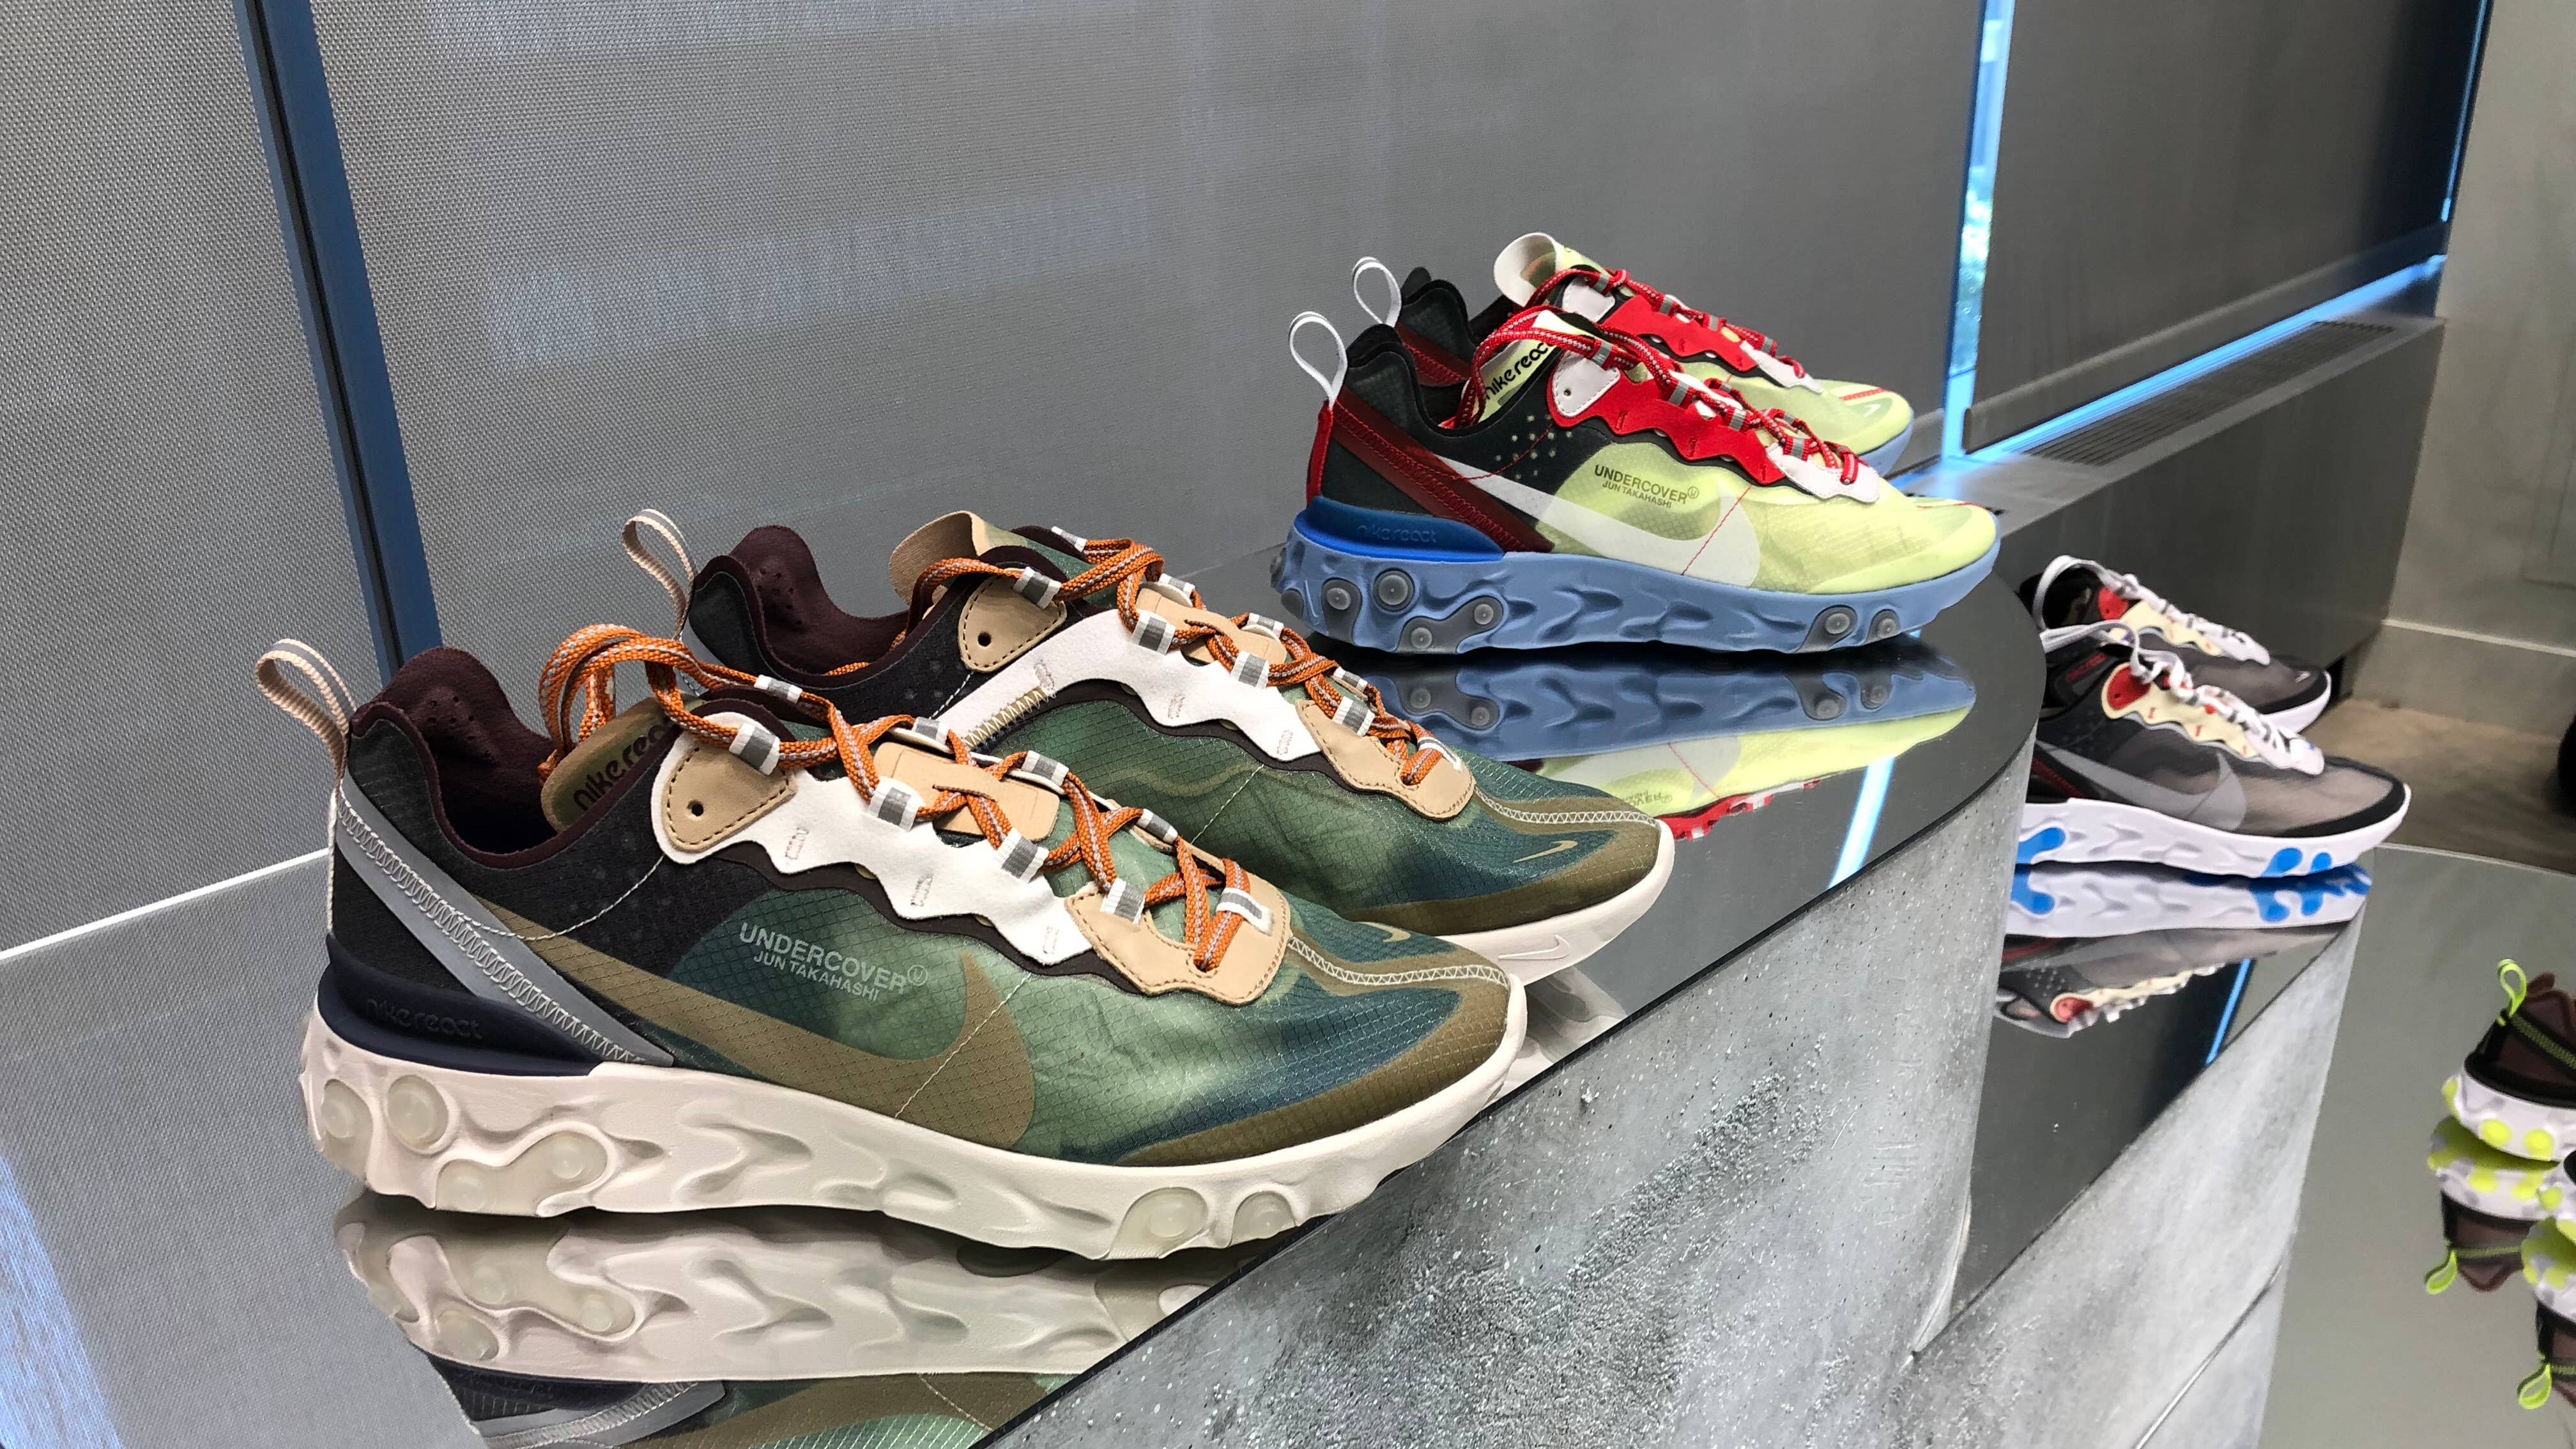 Undercover x Nike React Element 87